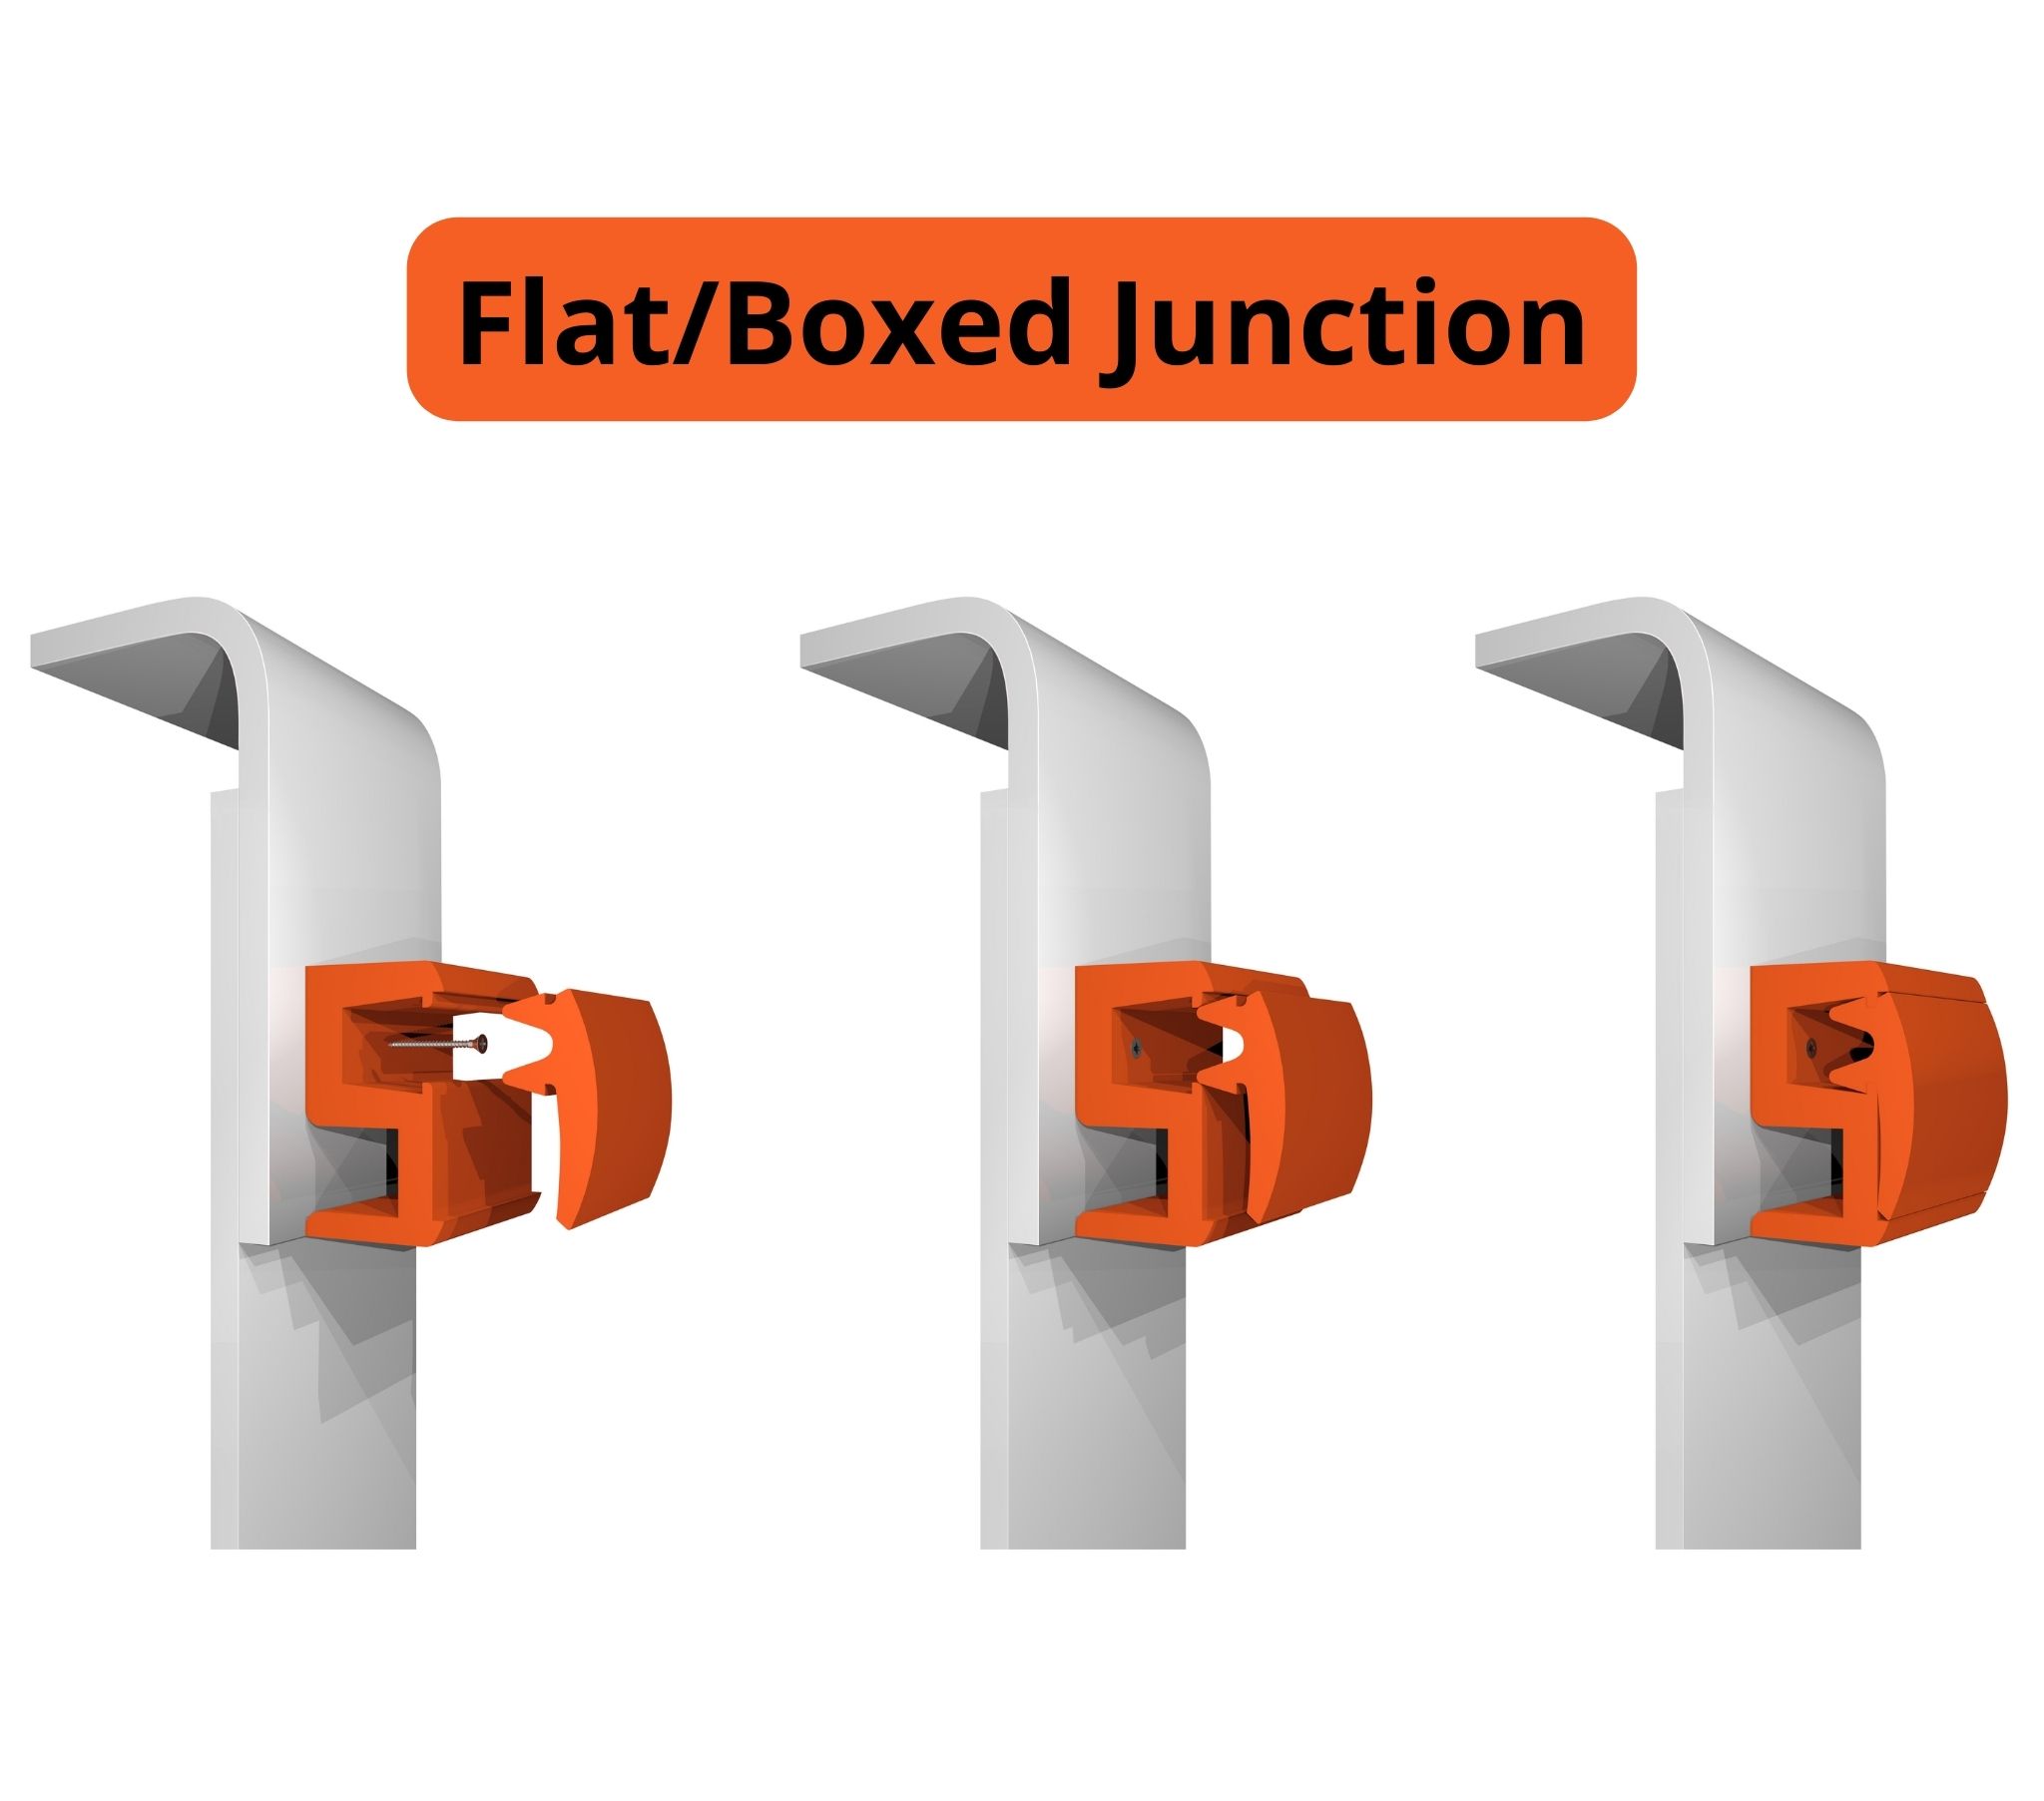 Flat/boxed junction